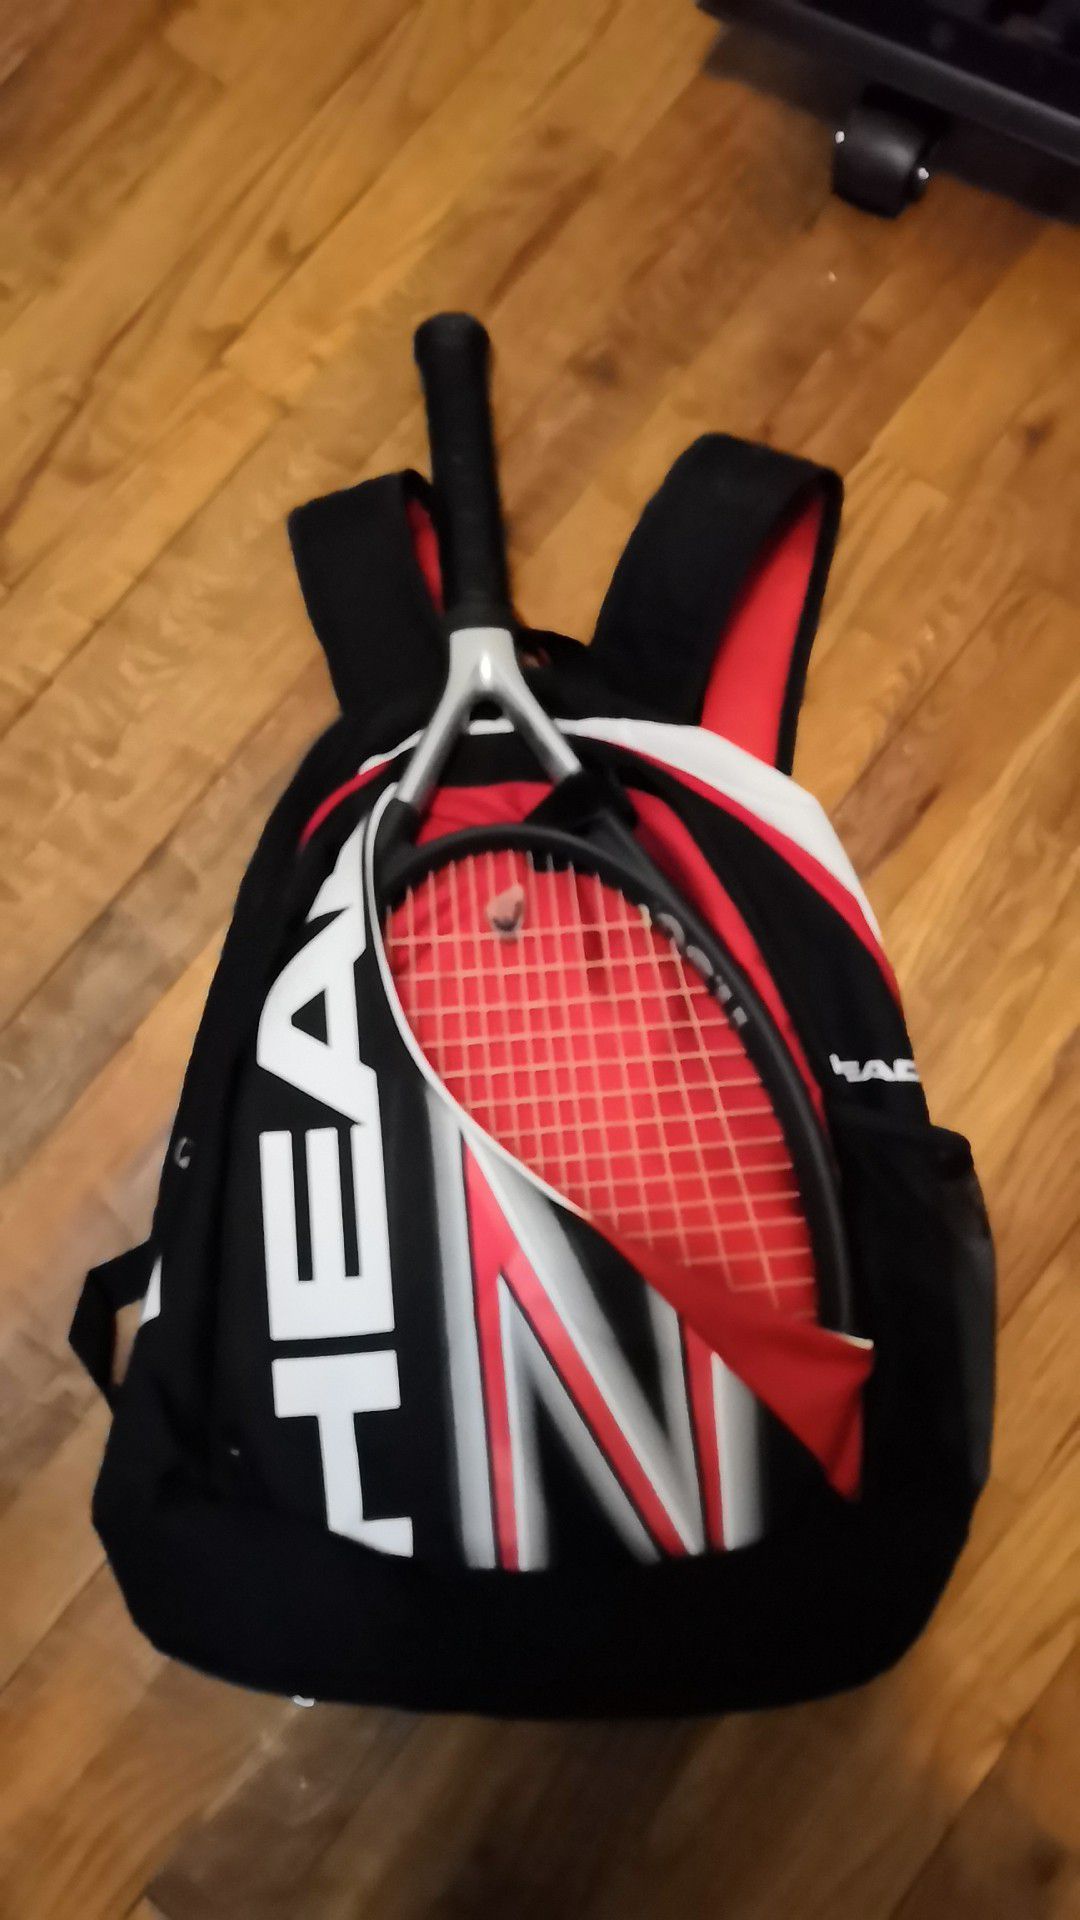 Head Tennis Racket and Backpack - Ti S6